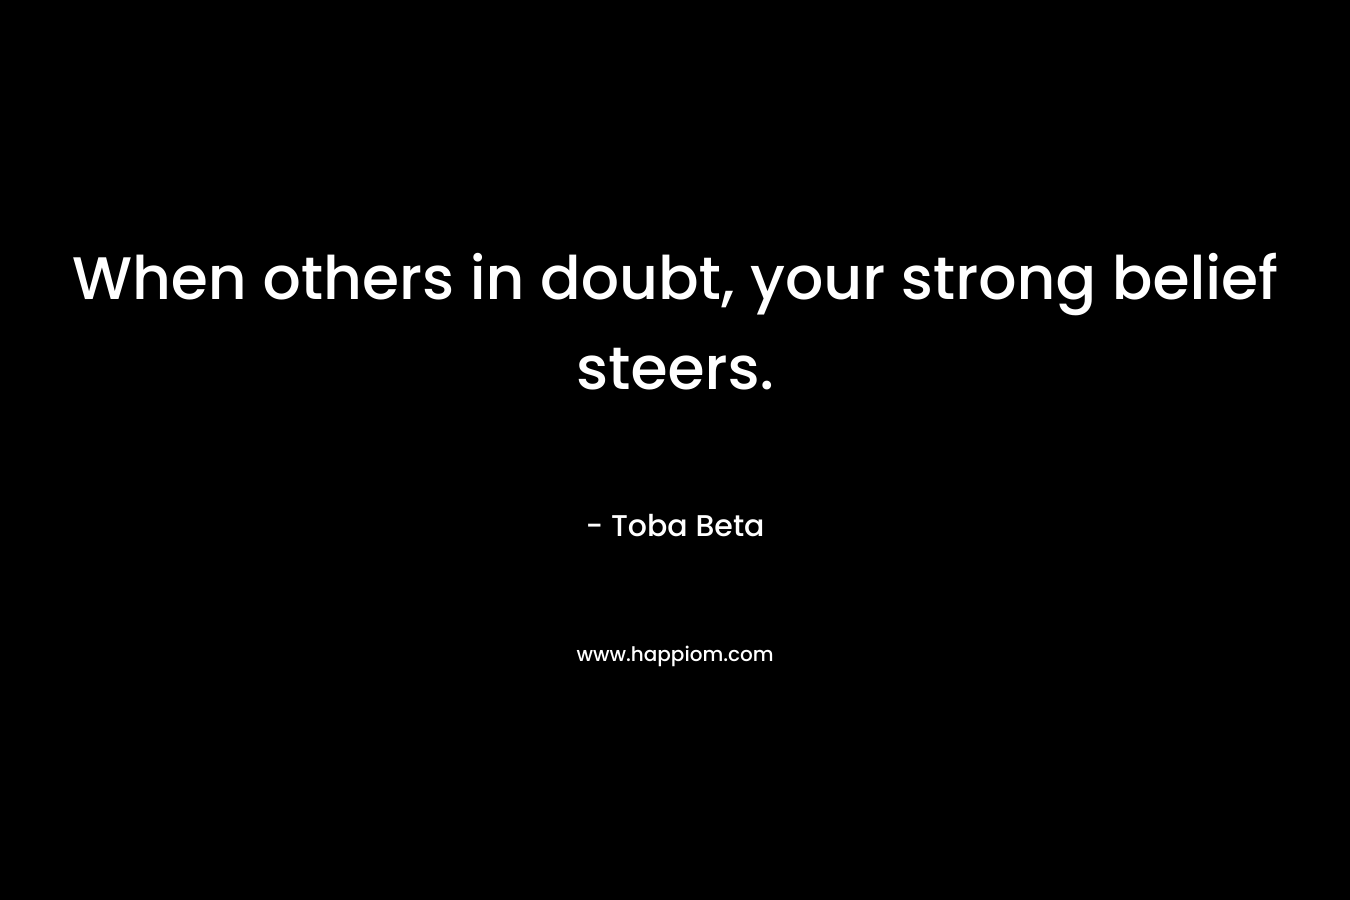 When others in doubt, your strong belief steers.